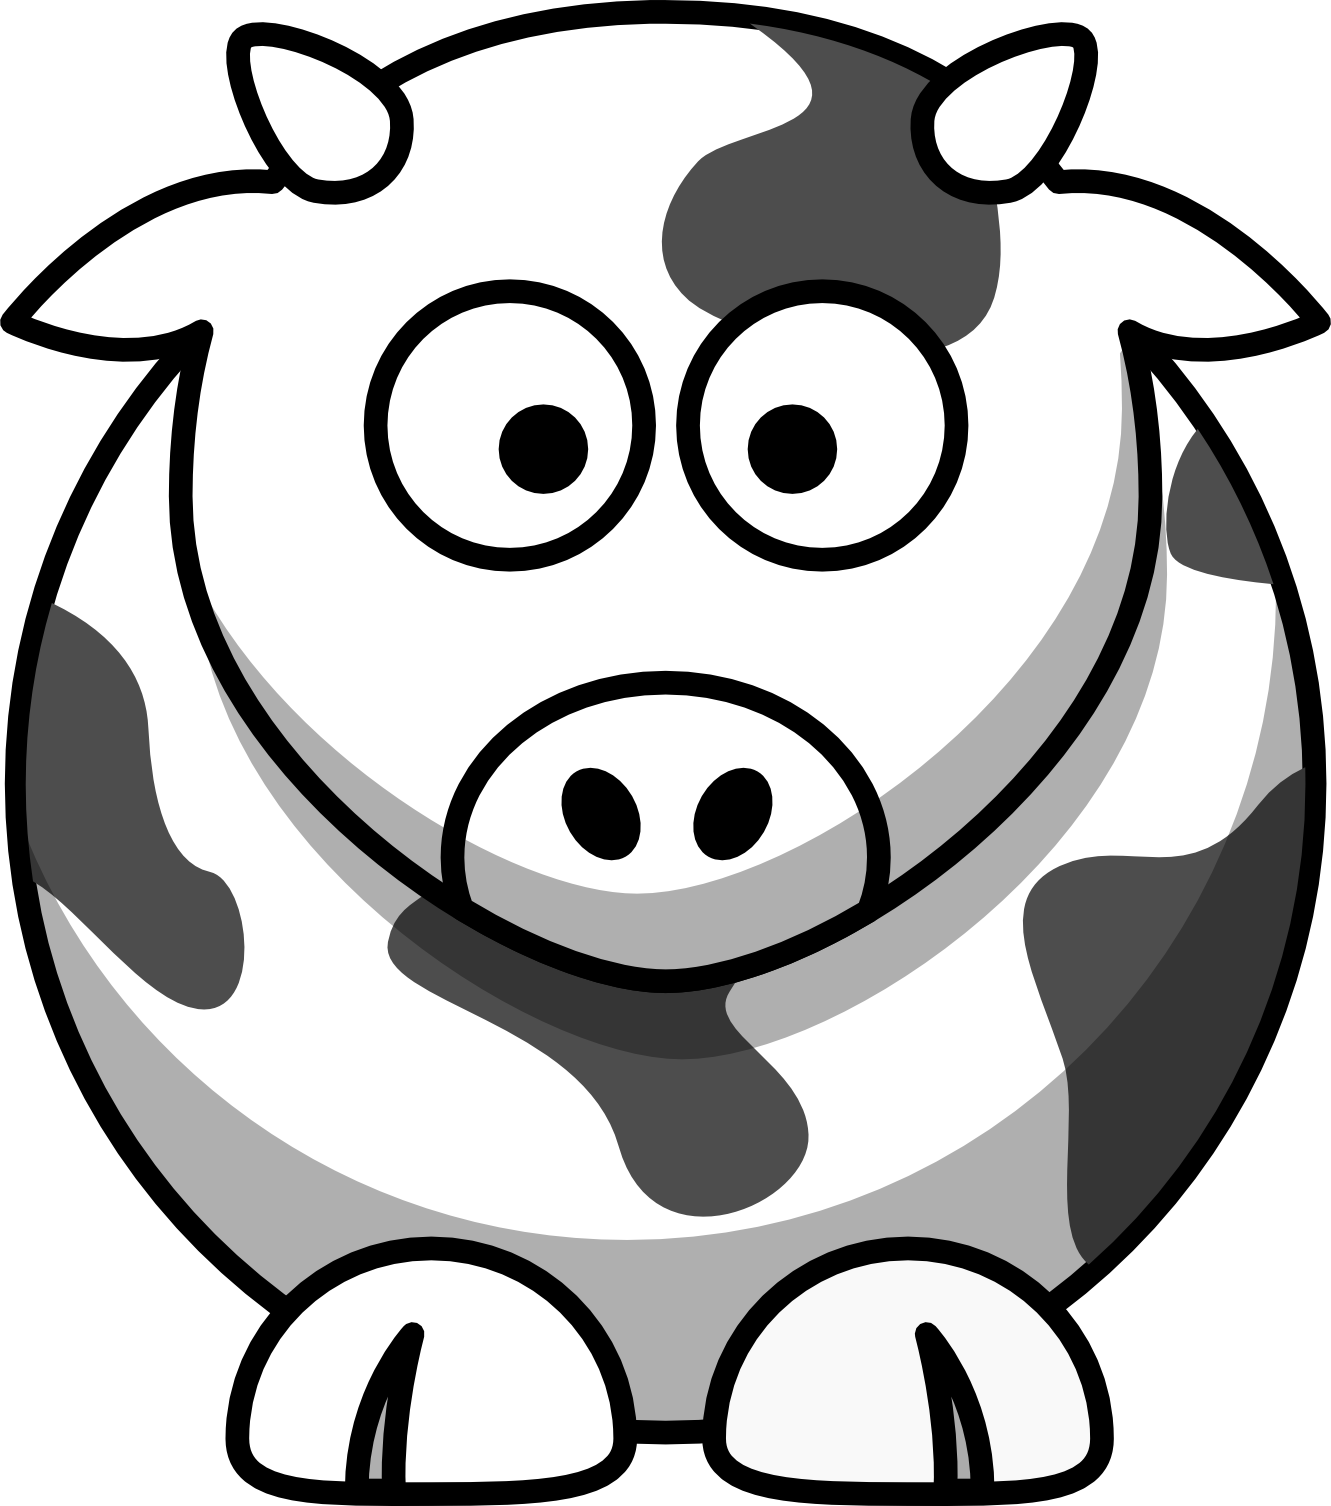 Lemmling Cartoon Cow Coloring Book Colouring Black White Line Art